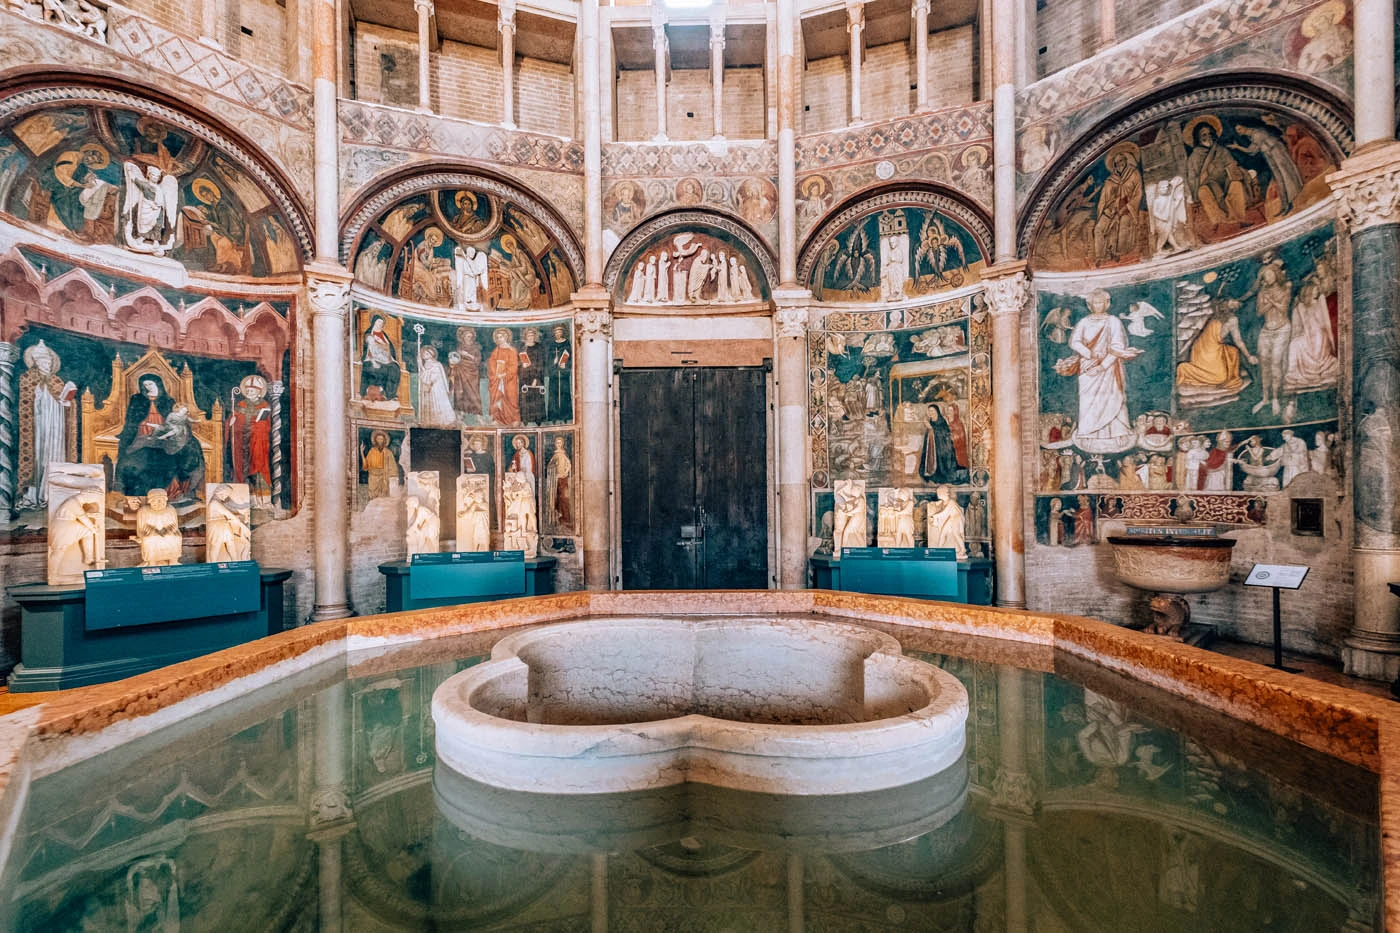 BEST Things to do in Parma Italy - Inside Parma Baptistery